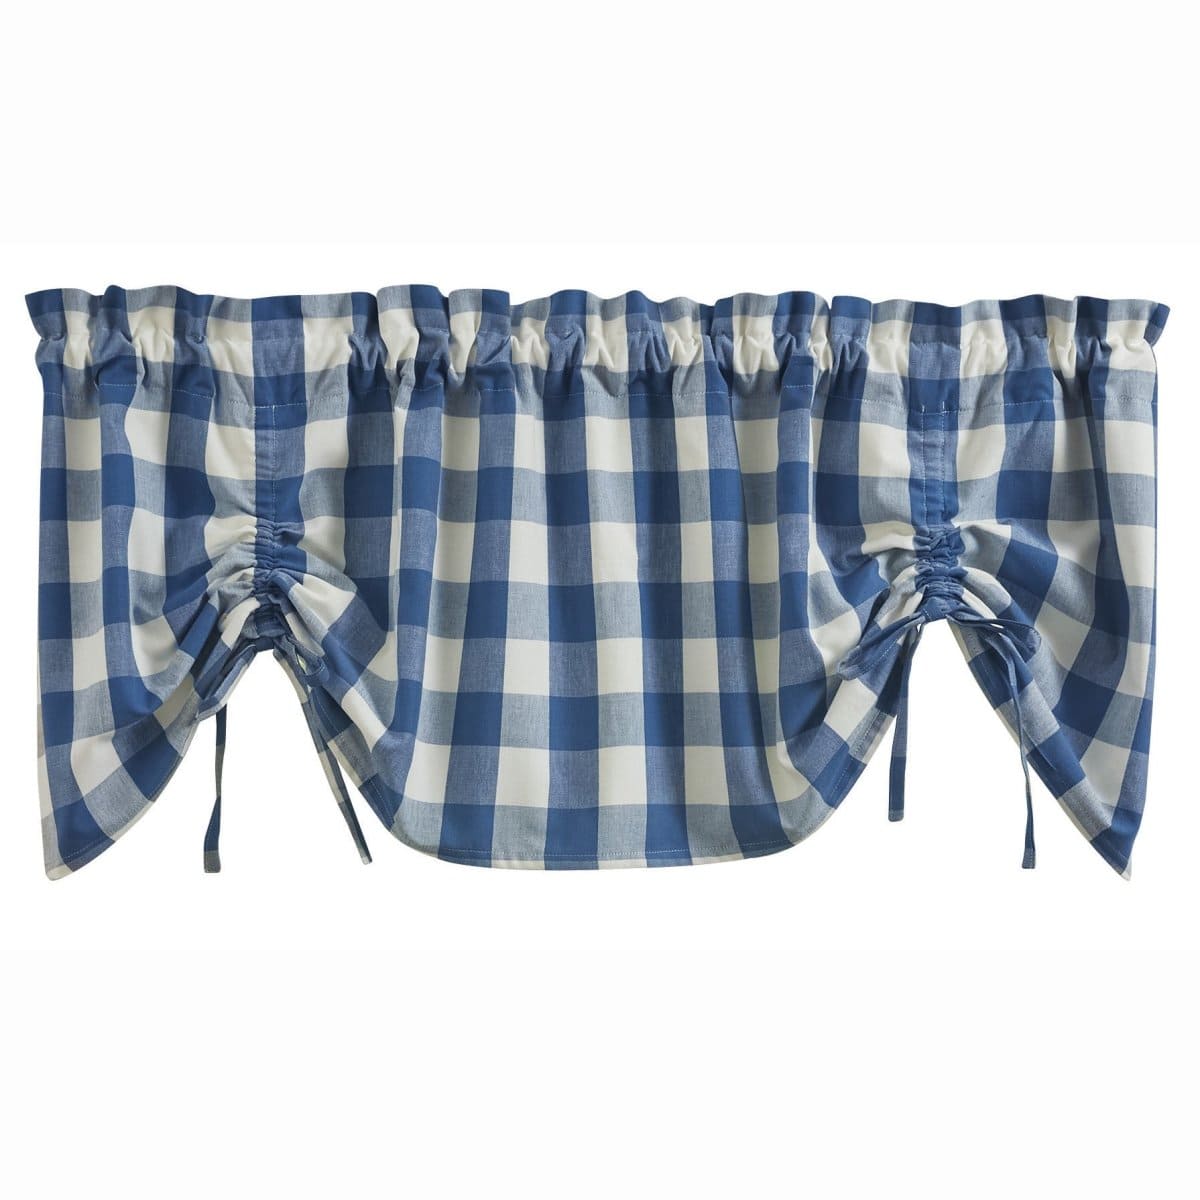 Wicklow Check in China Blue Tie Up Farmhouse Valance Lined-Park Designs-The Village Merchant